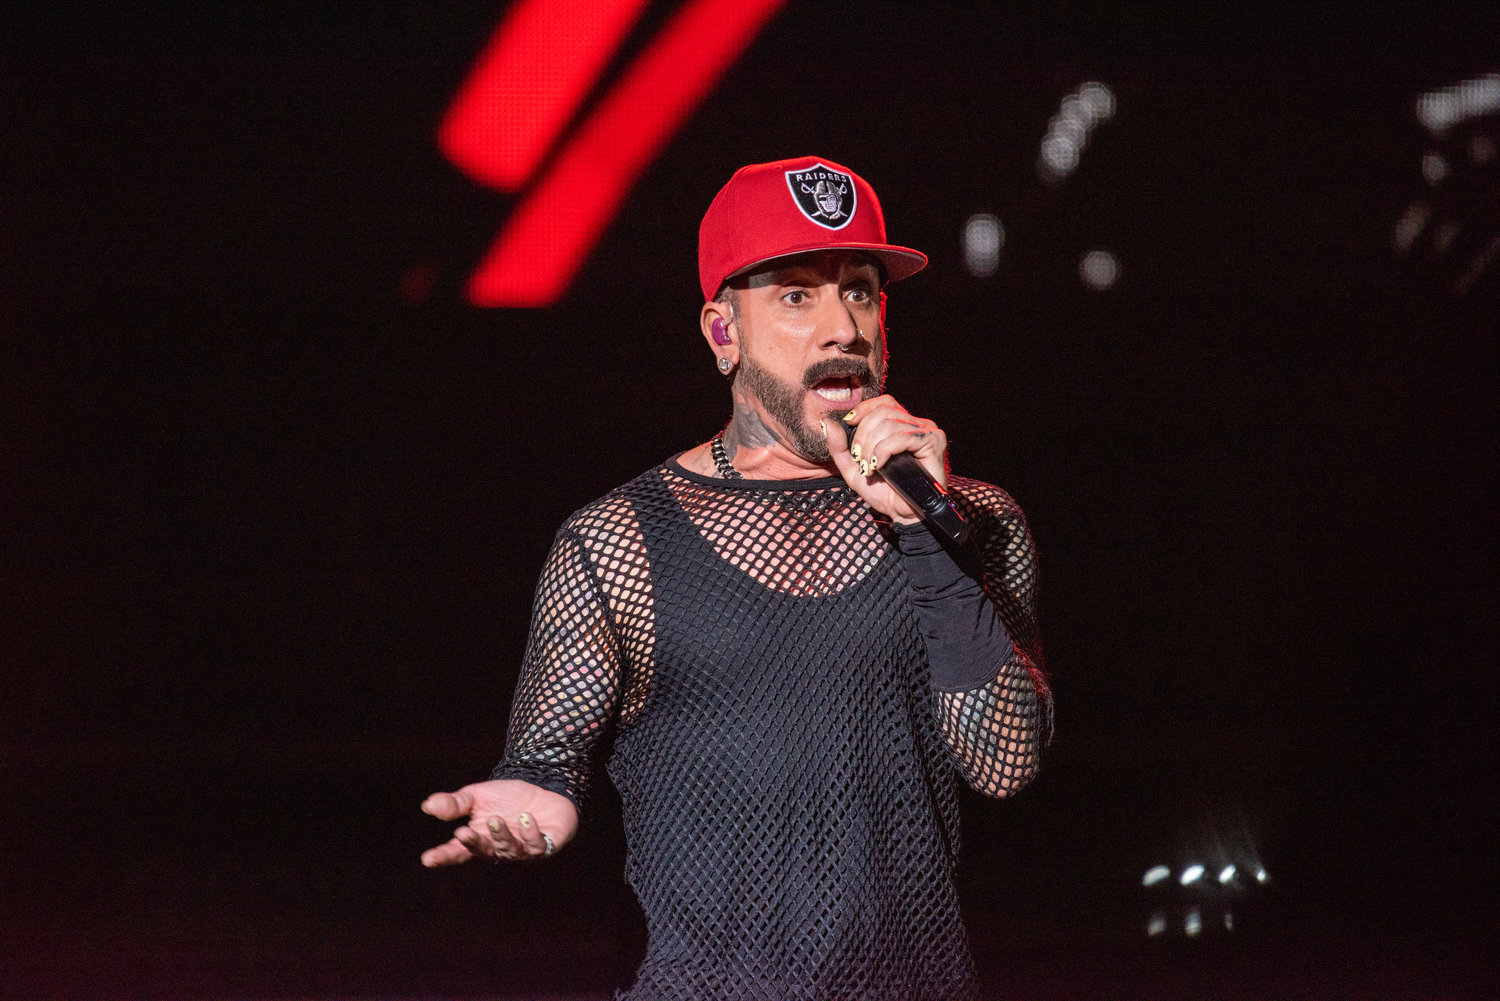 AJ McLean wasn’t shy with the crowd, conversing directly with attendees between songs and jumping from the stage to walk through his adoring fans.